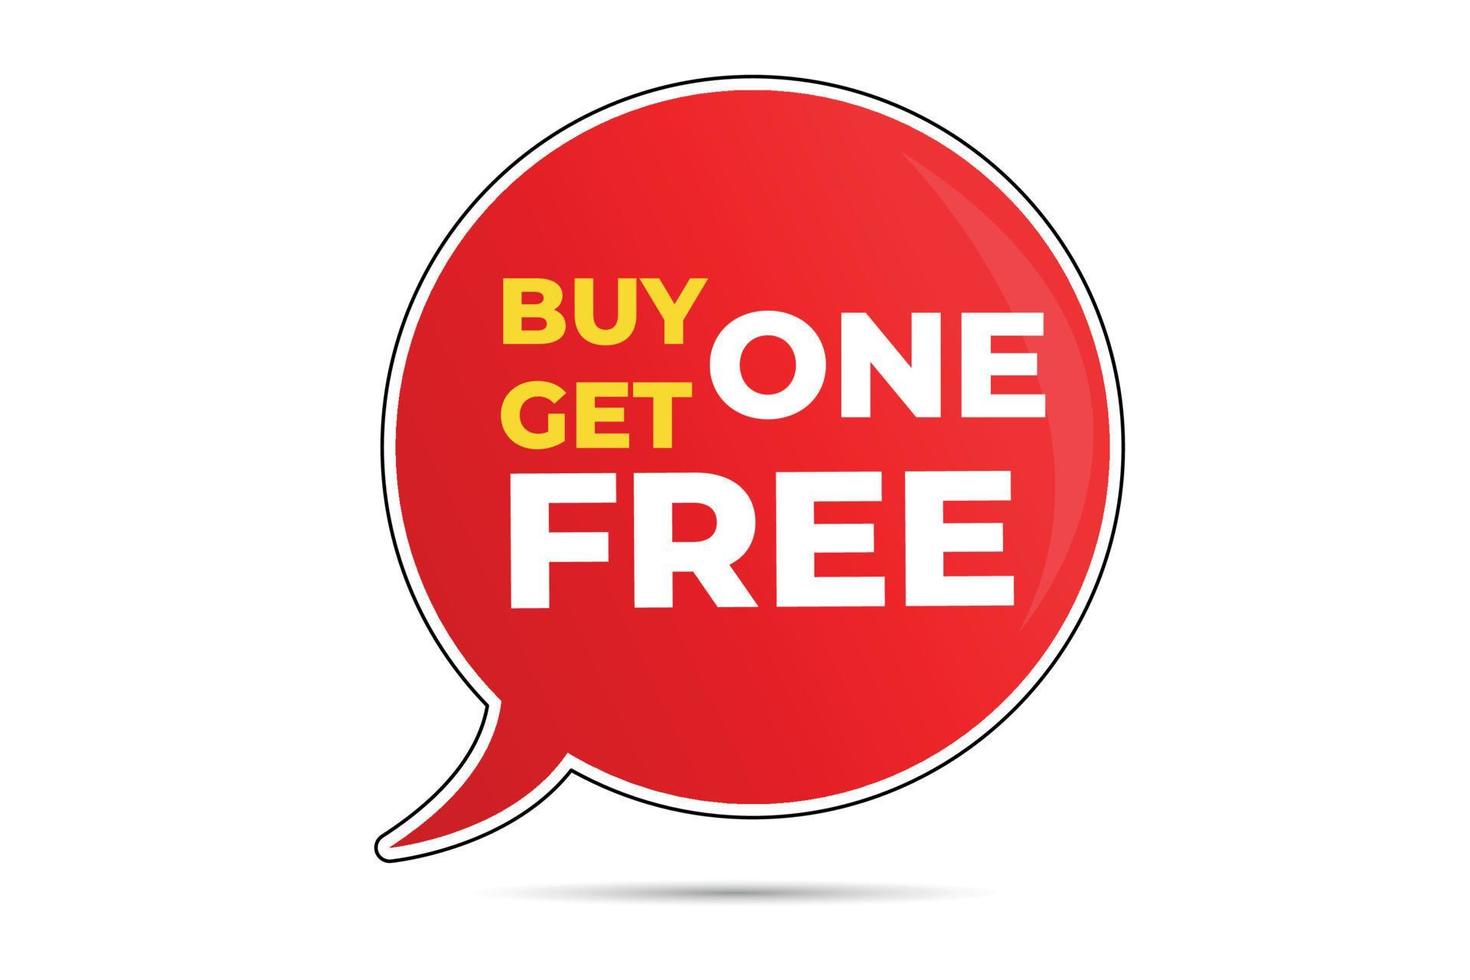 Buy one get one free promotional tag label design. vector